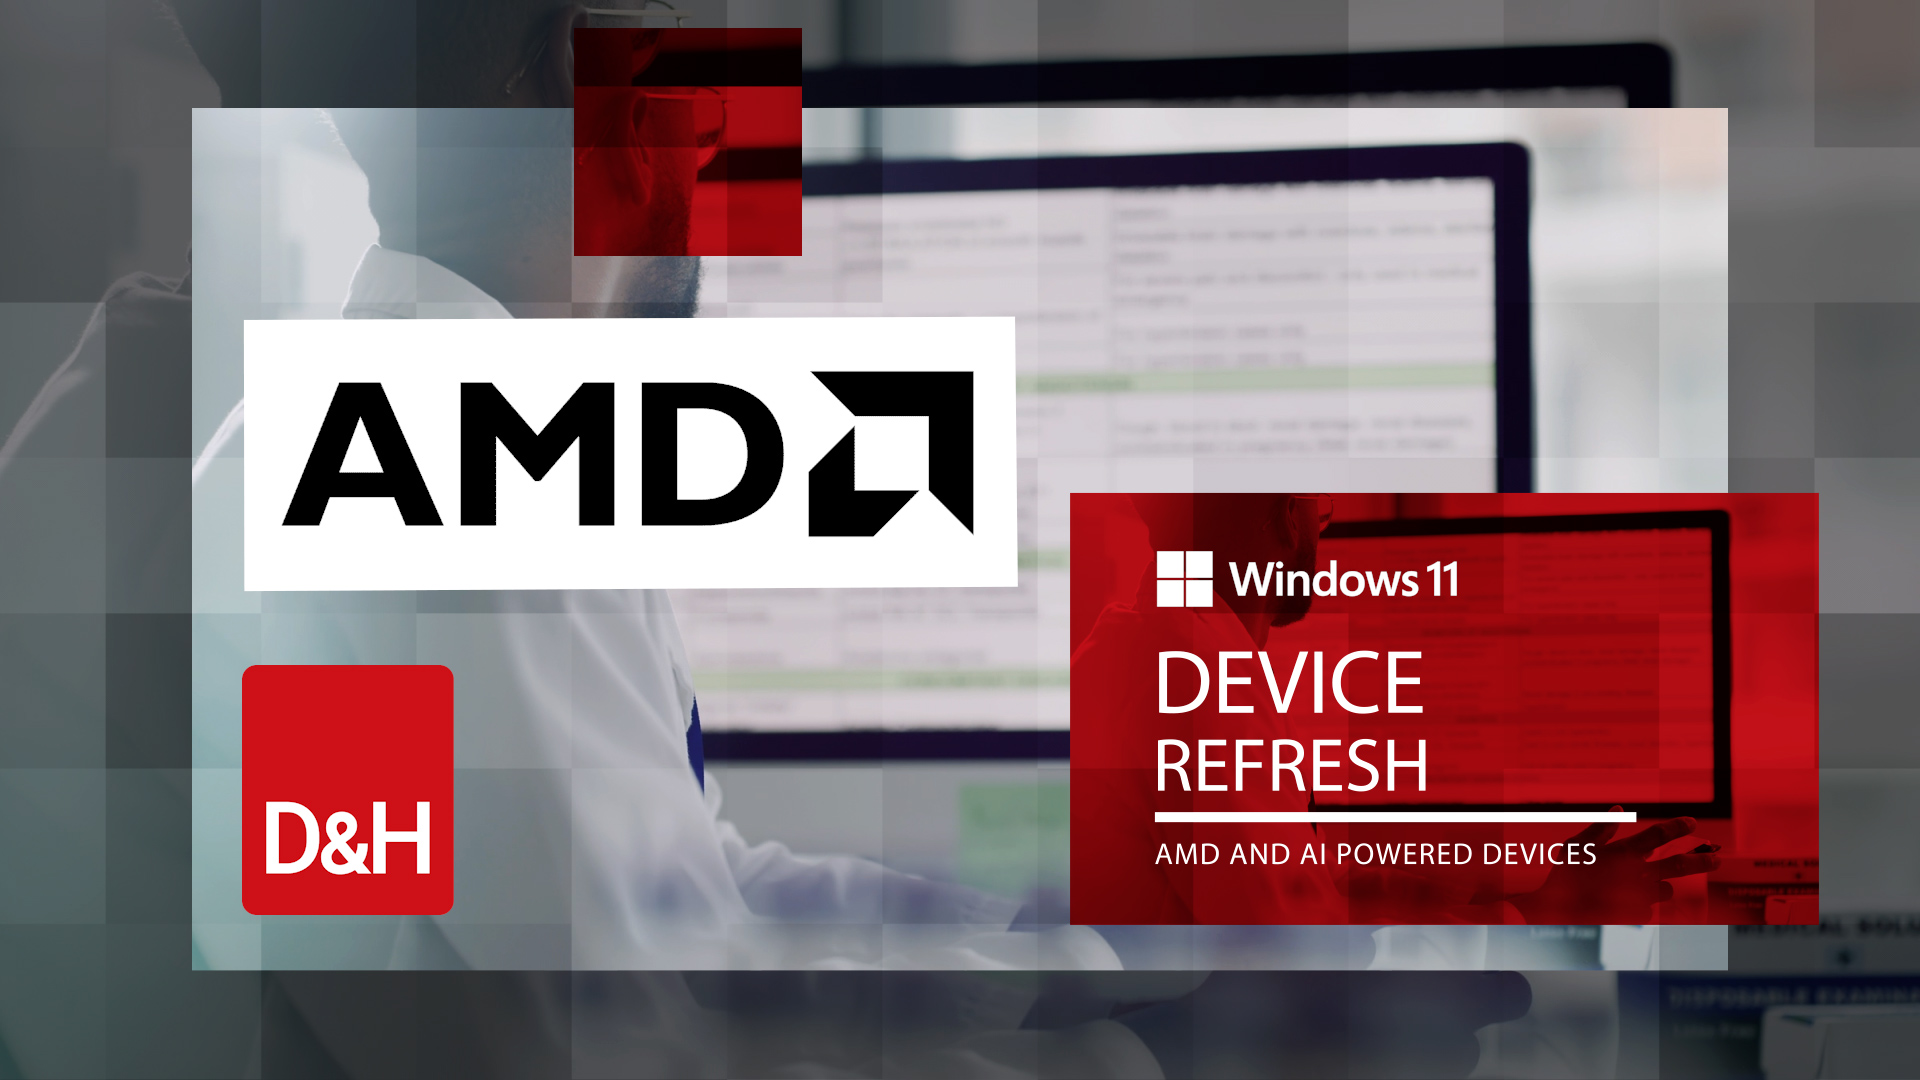 AMD and AI powered devices